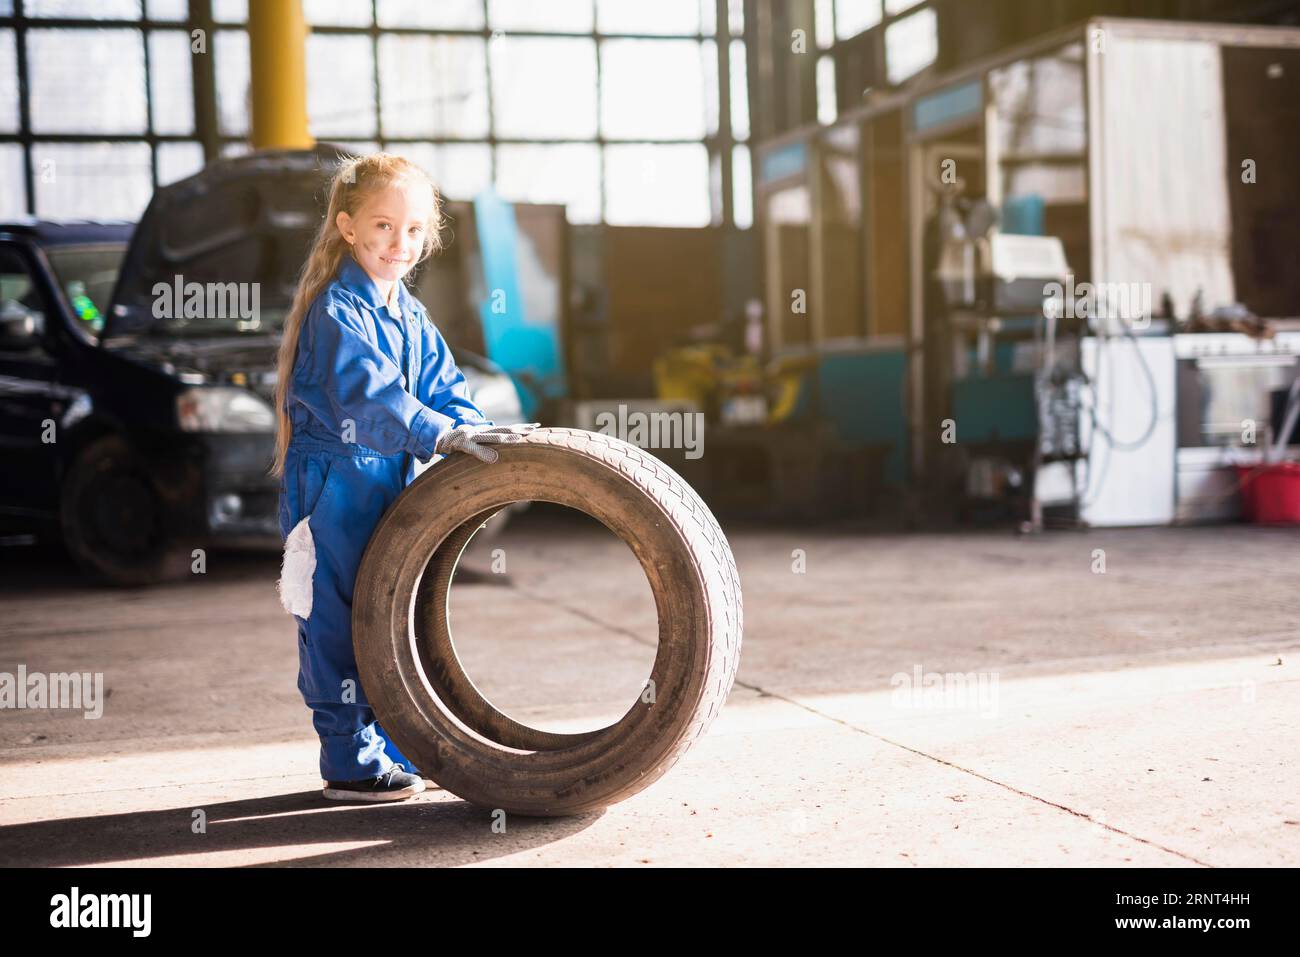 Little girl overall standing with car wheel Stock Photo